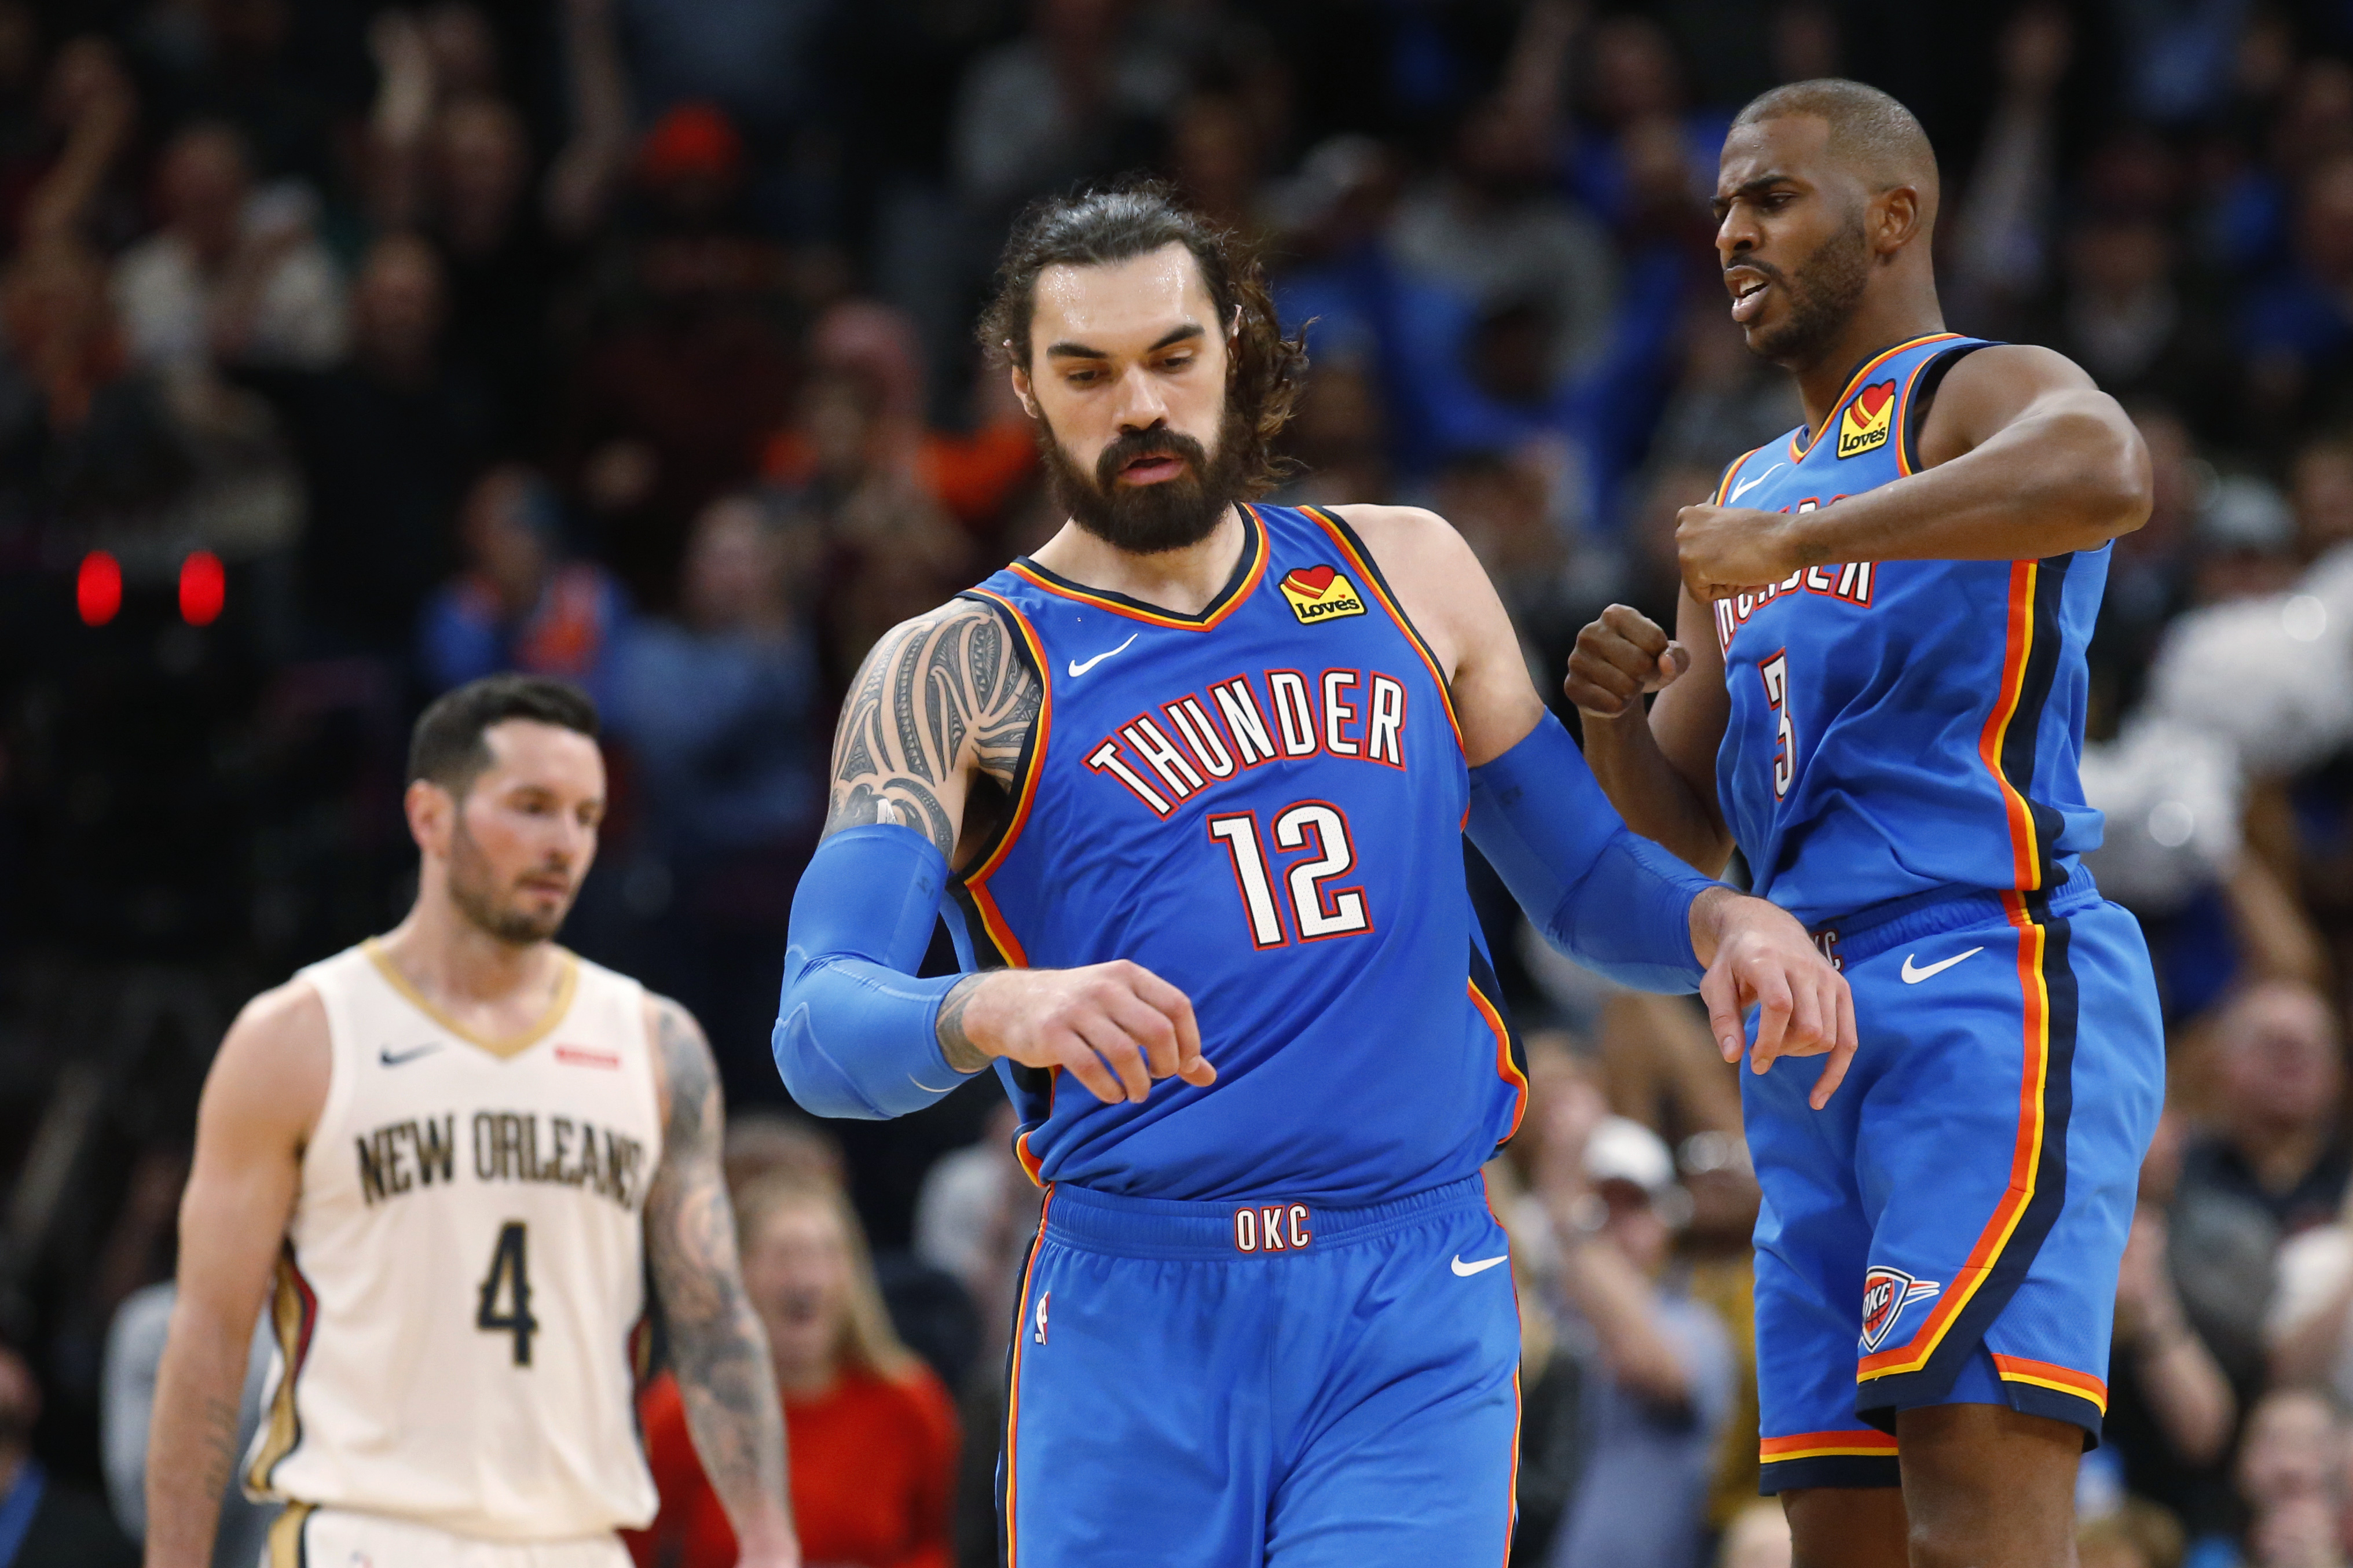 Schroder scores 25, Thunder top Pelicans with late flurry